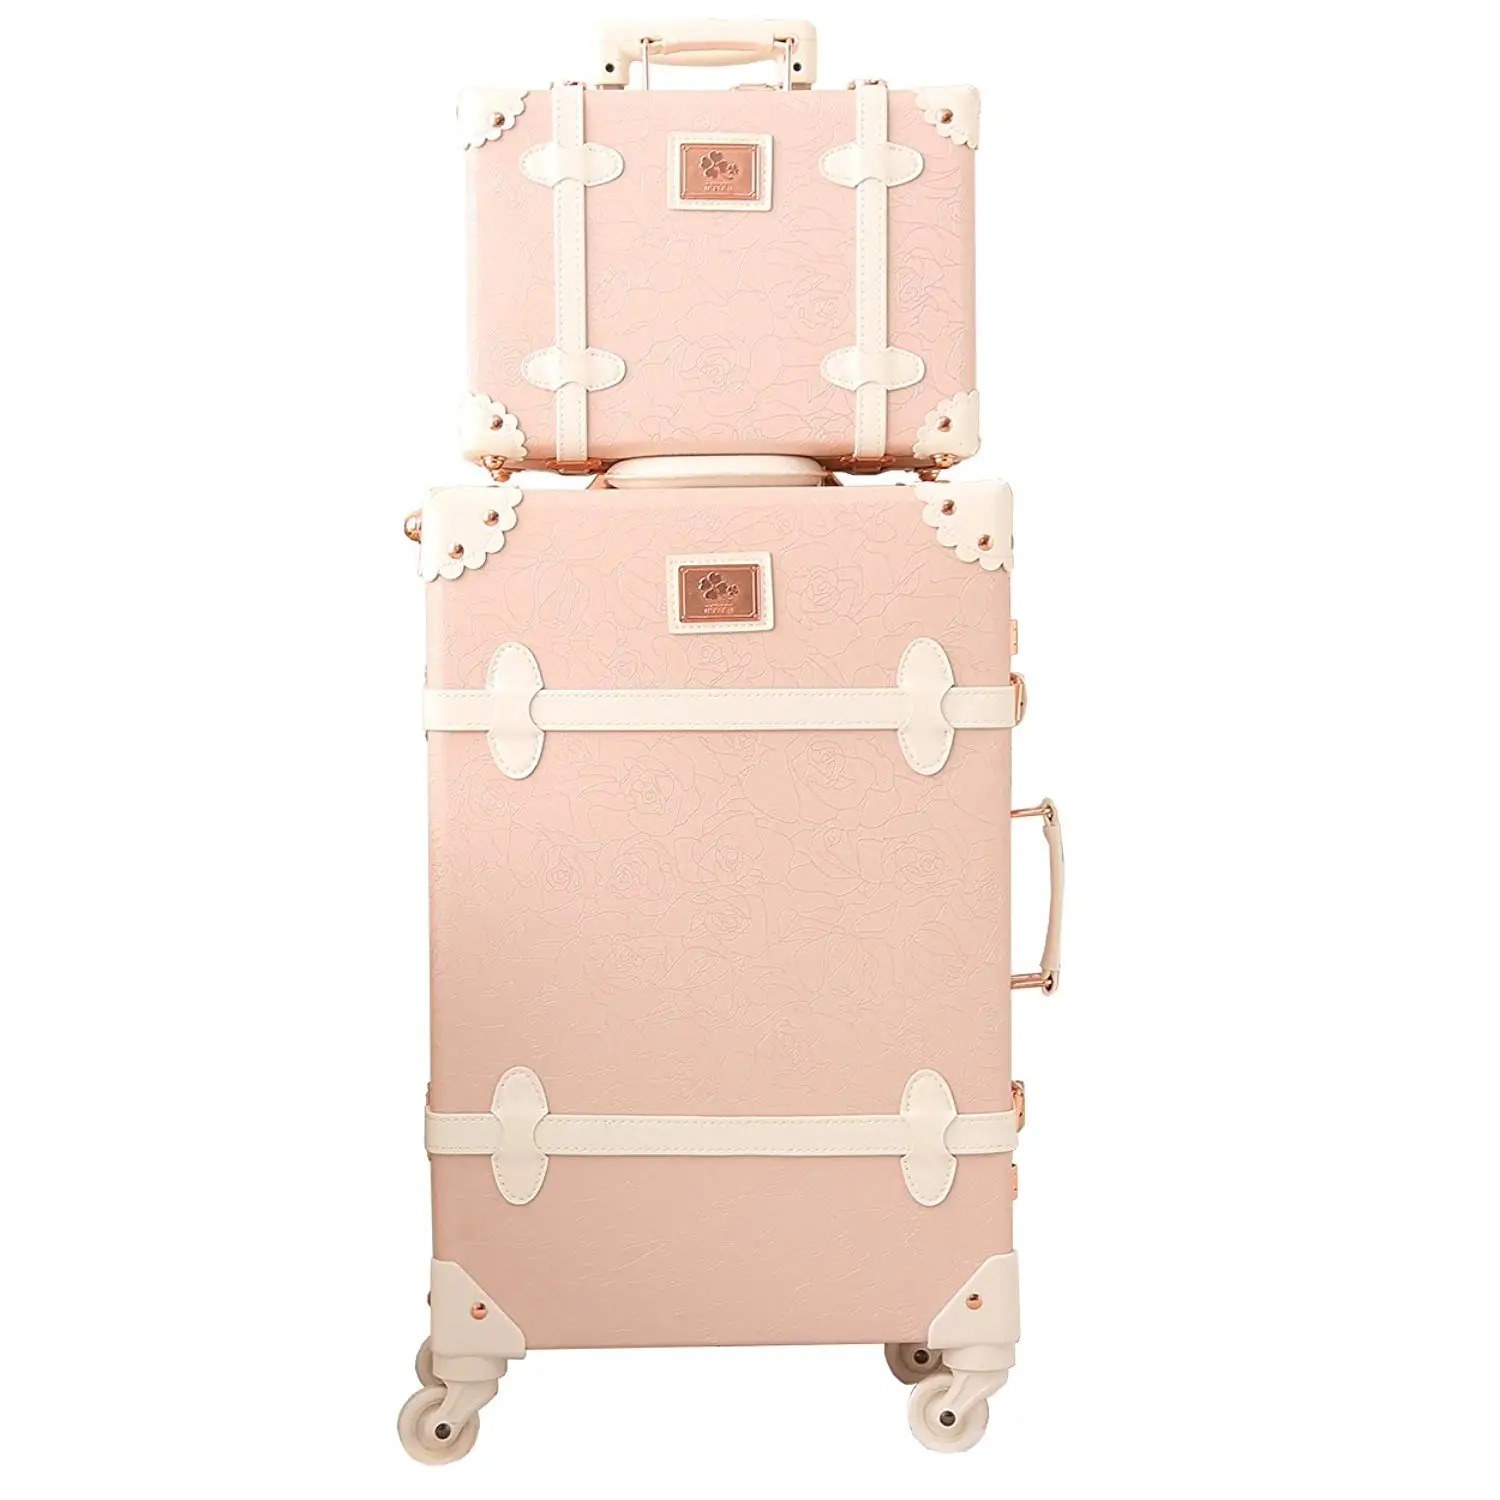 Cheap Cute Suitcases, find Cute Suitcases deals on line at Alibaba.com